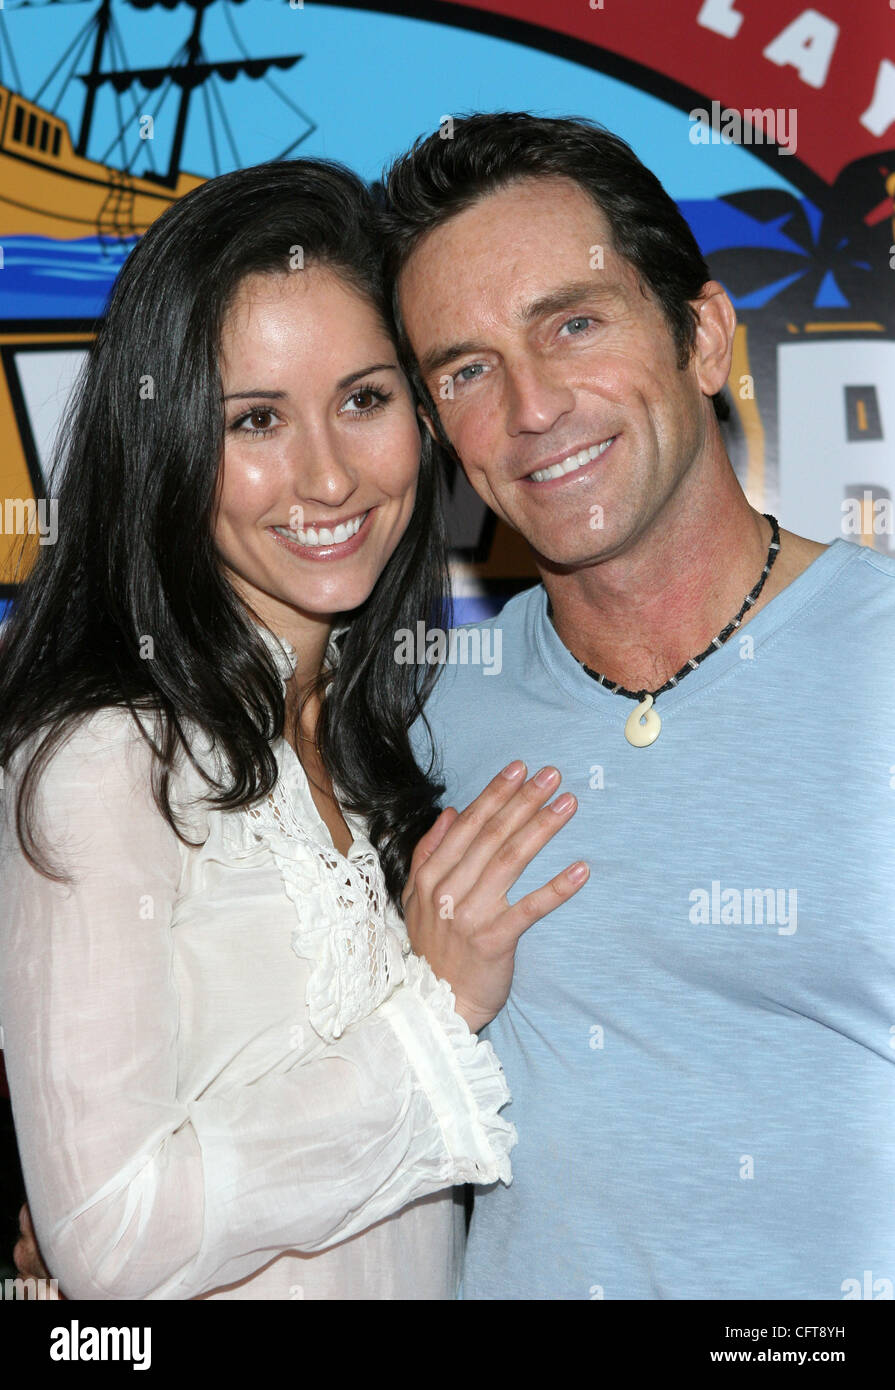 Dec 17, 2006; Los Angeles, CA, USA; Host JEFF PROBST and JULIE BERRY at the 'Survivor: Cook Islands' finale and reunion at CBS studios in Los Angeles. Mandatory Credit: Photo by Marianna Day Massey/ZUMA Press. (©) Copyright 2006 by Marianna Day Massey Stock Photo